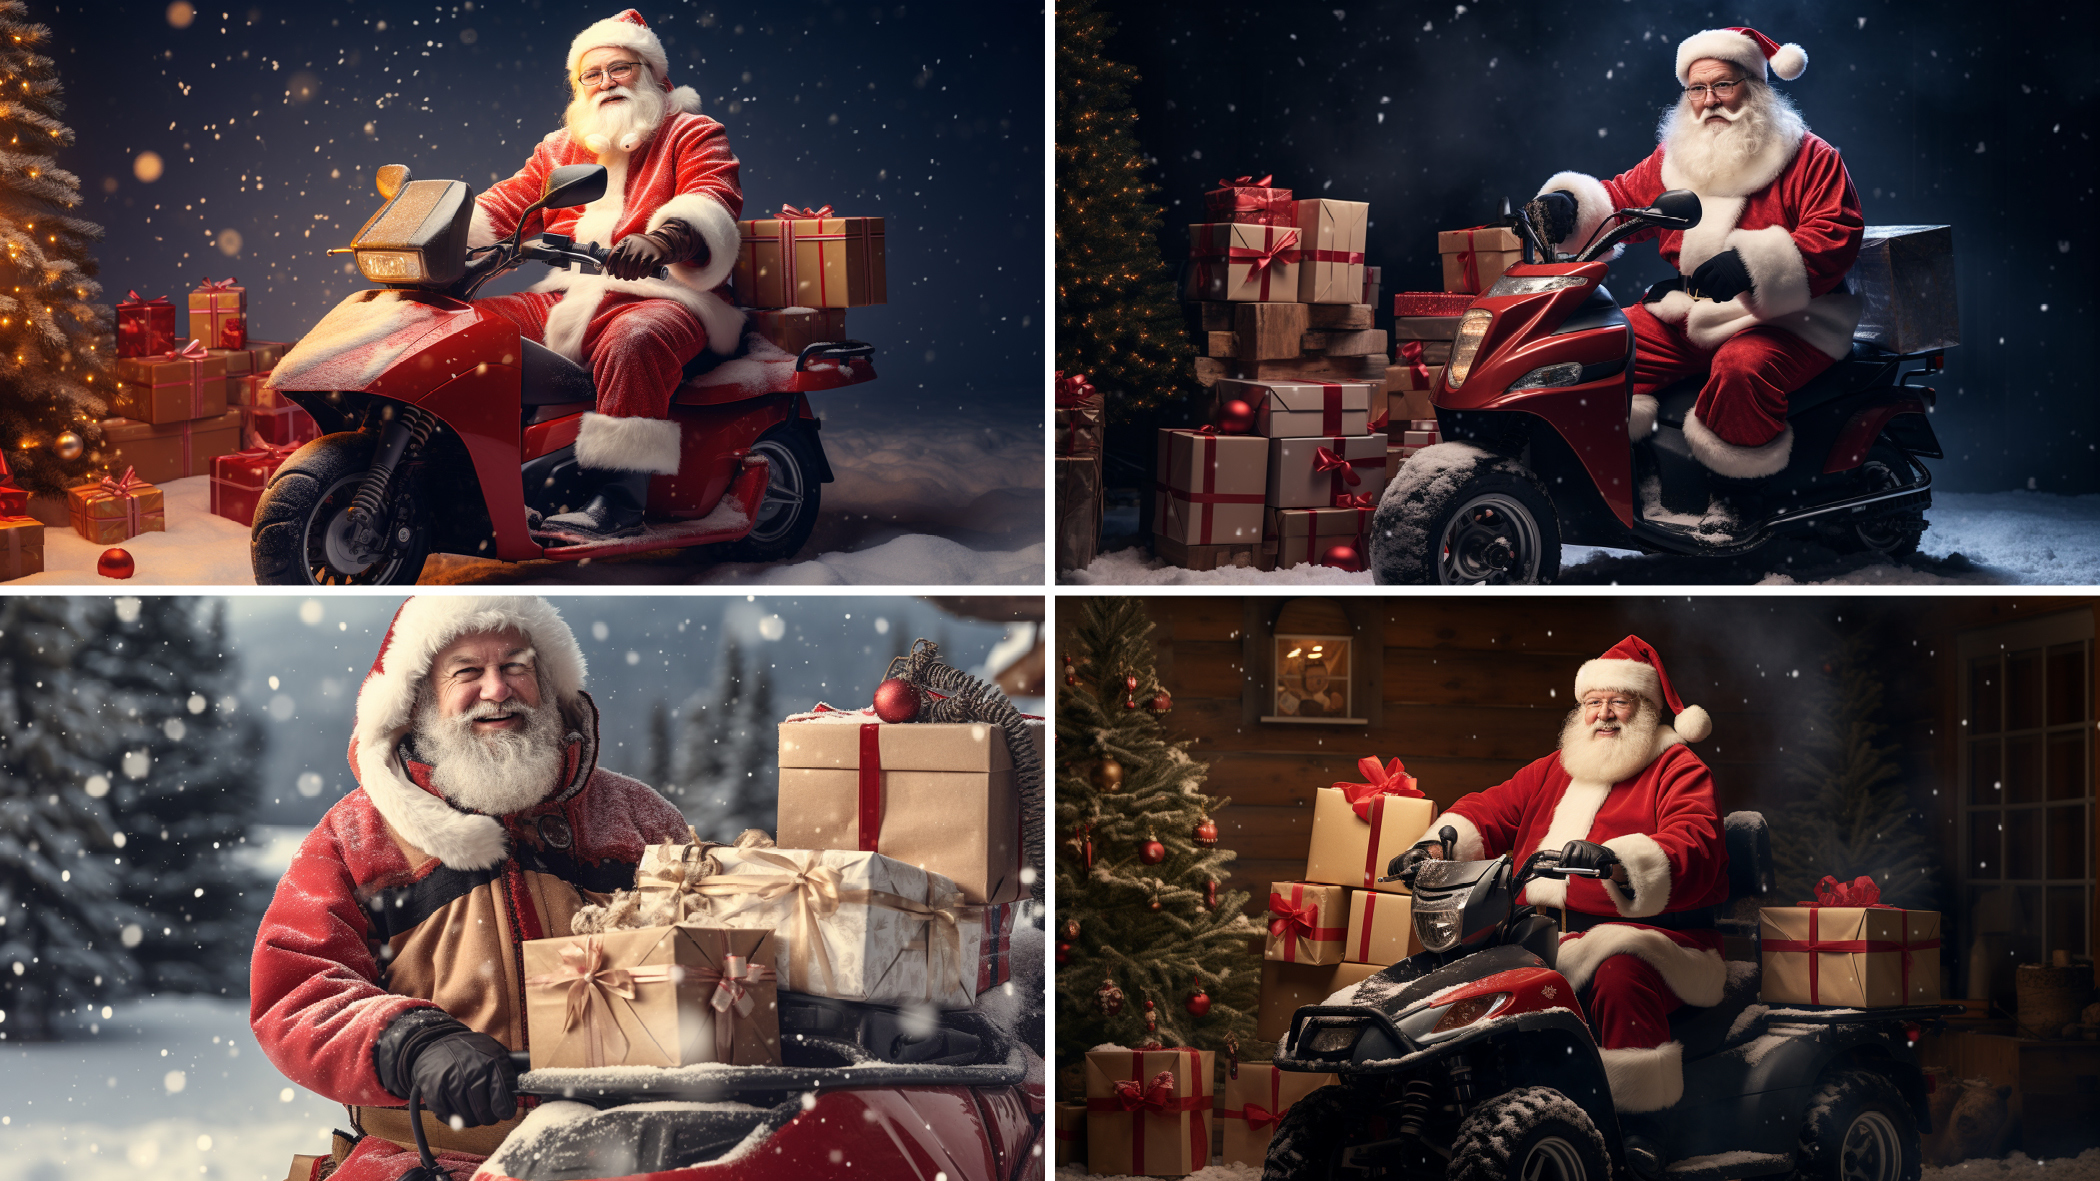 Four festive scenes with Santa Claus on various vehicles, like a scooter and ATV, surrounded by a Christmas tree and presents. Snow is falling.